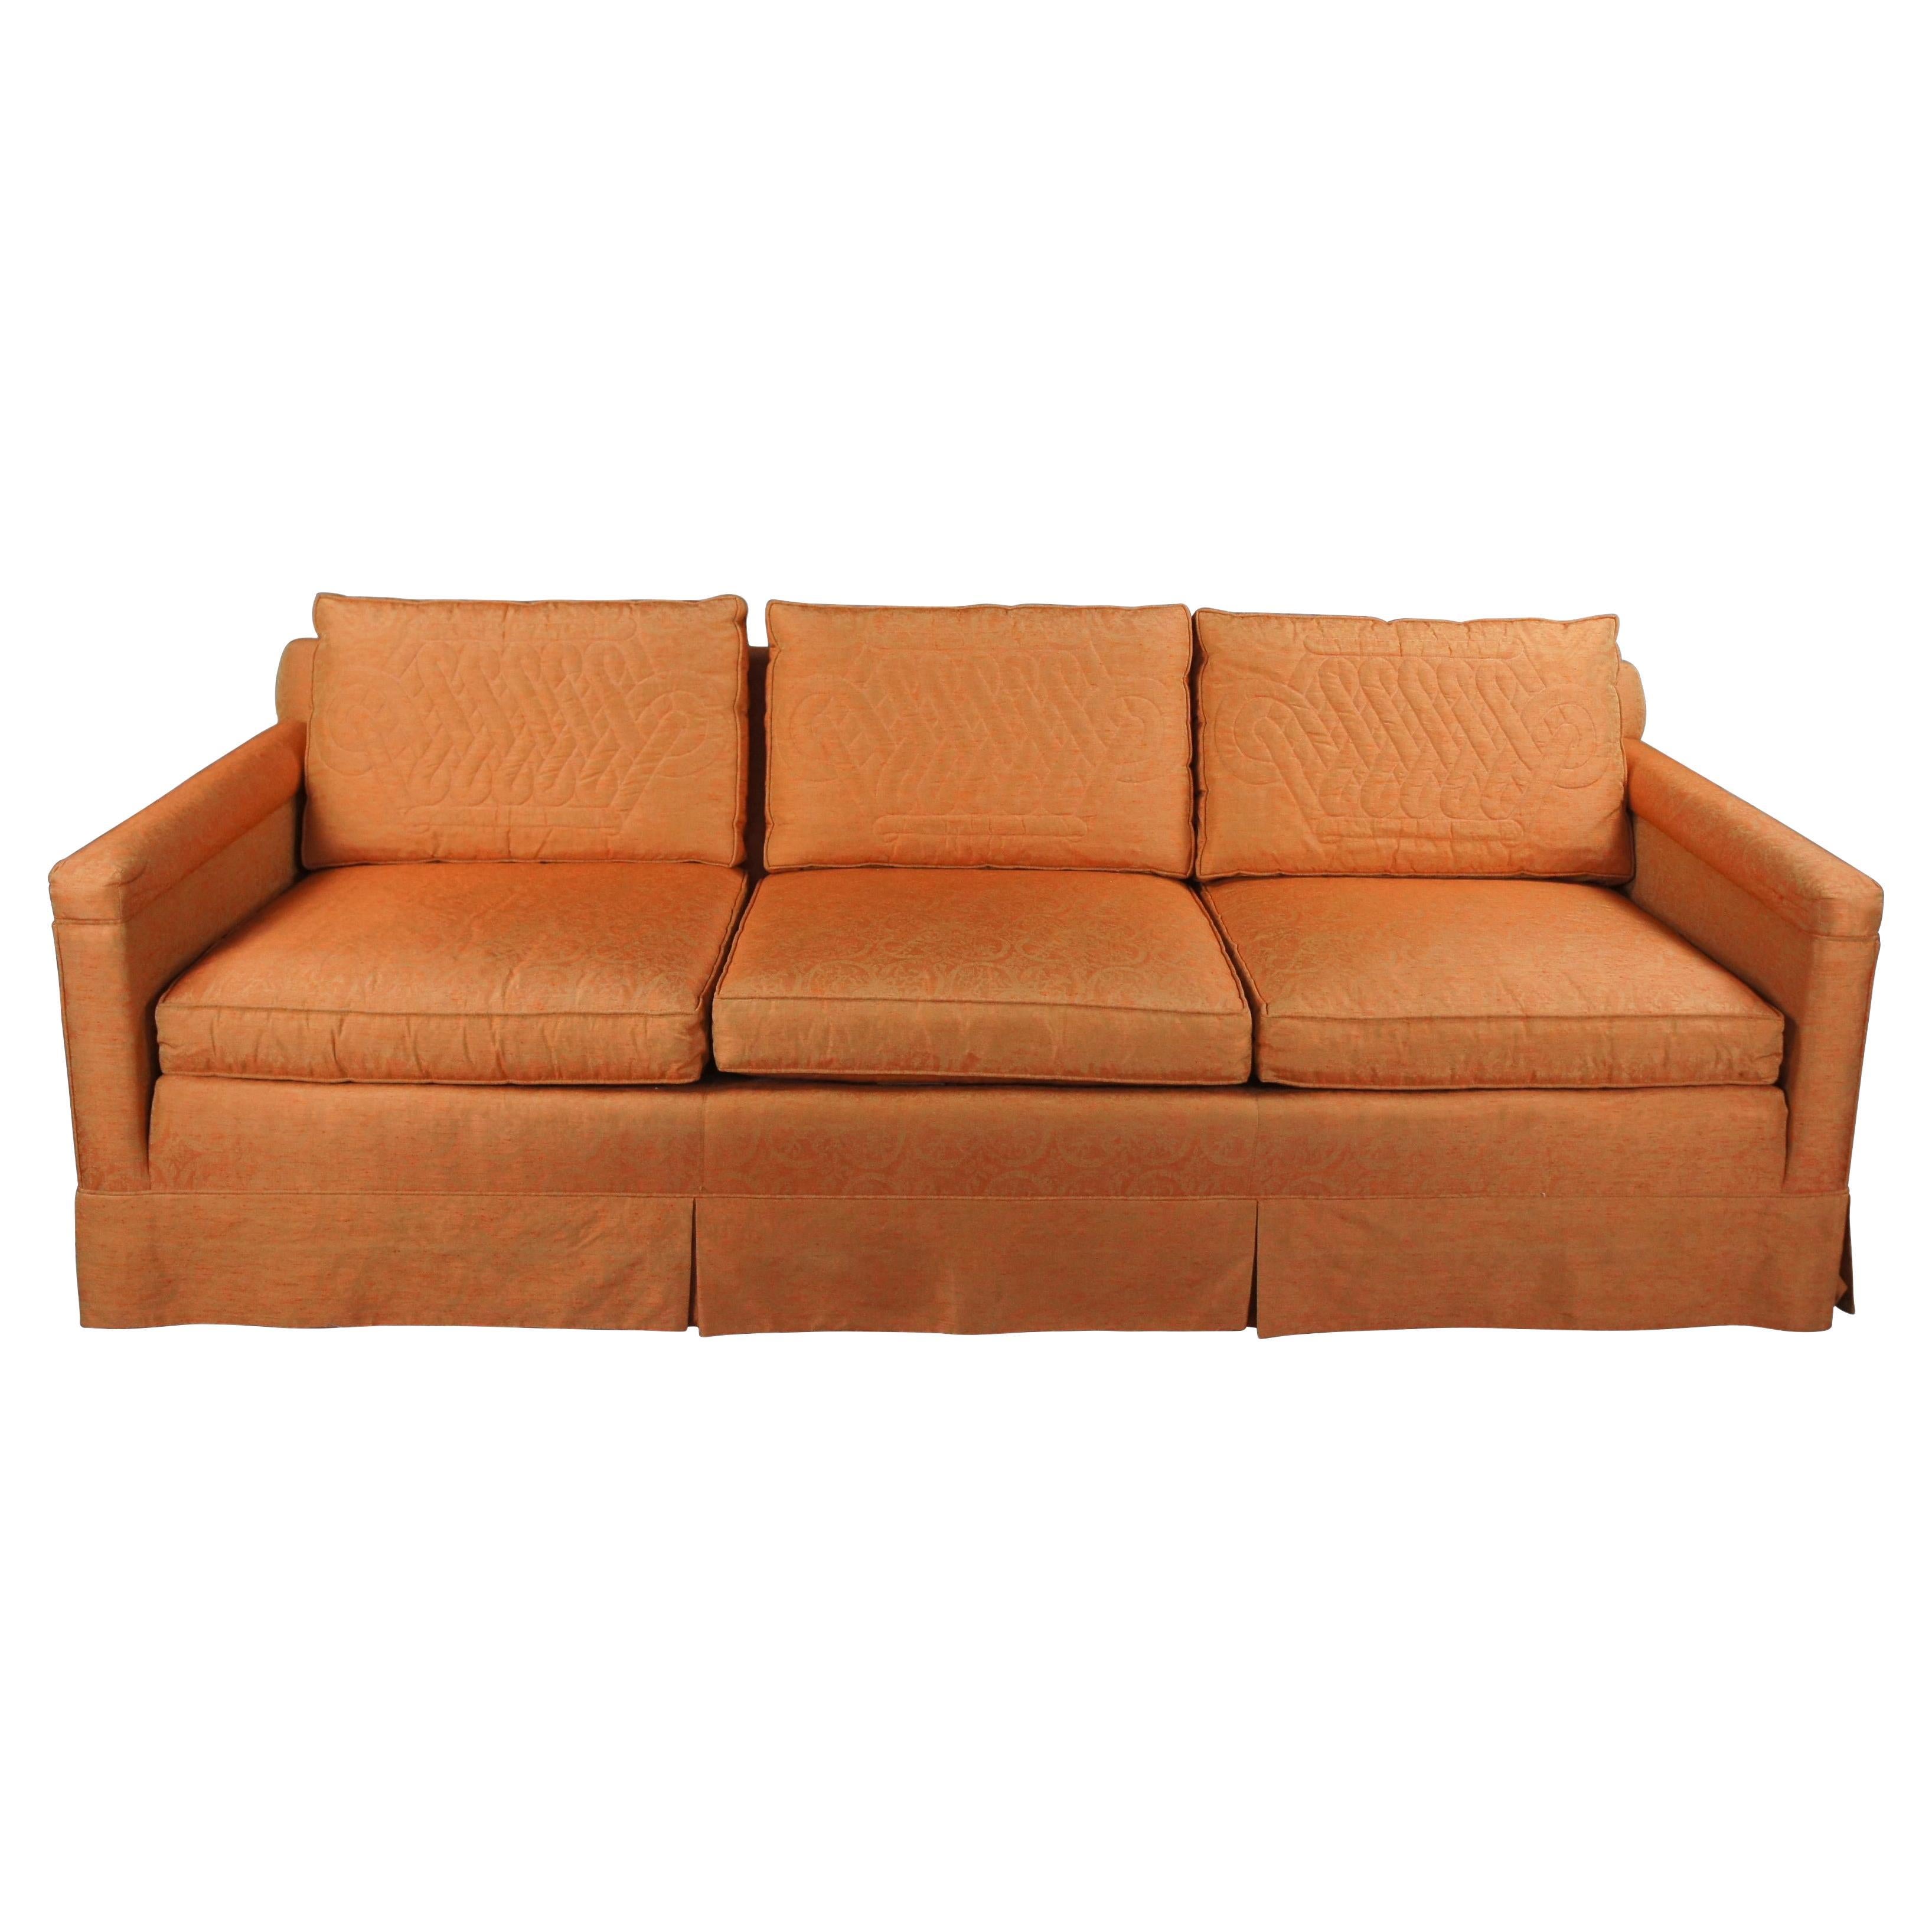 Globe Furniture Mid-Century Modern Orange Damask Mahogany Quilted 3 Seater Sofa For Sale